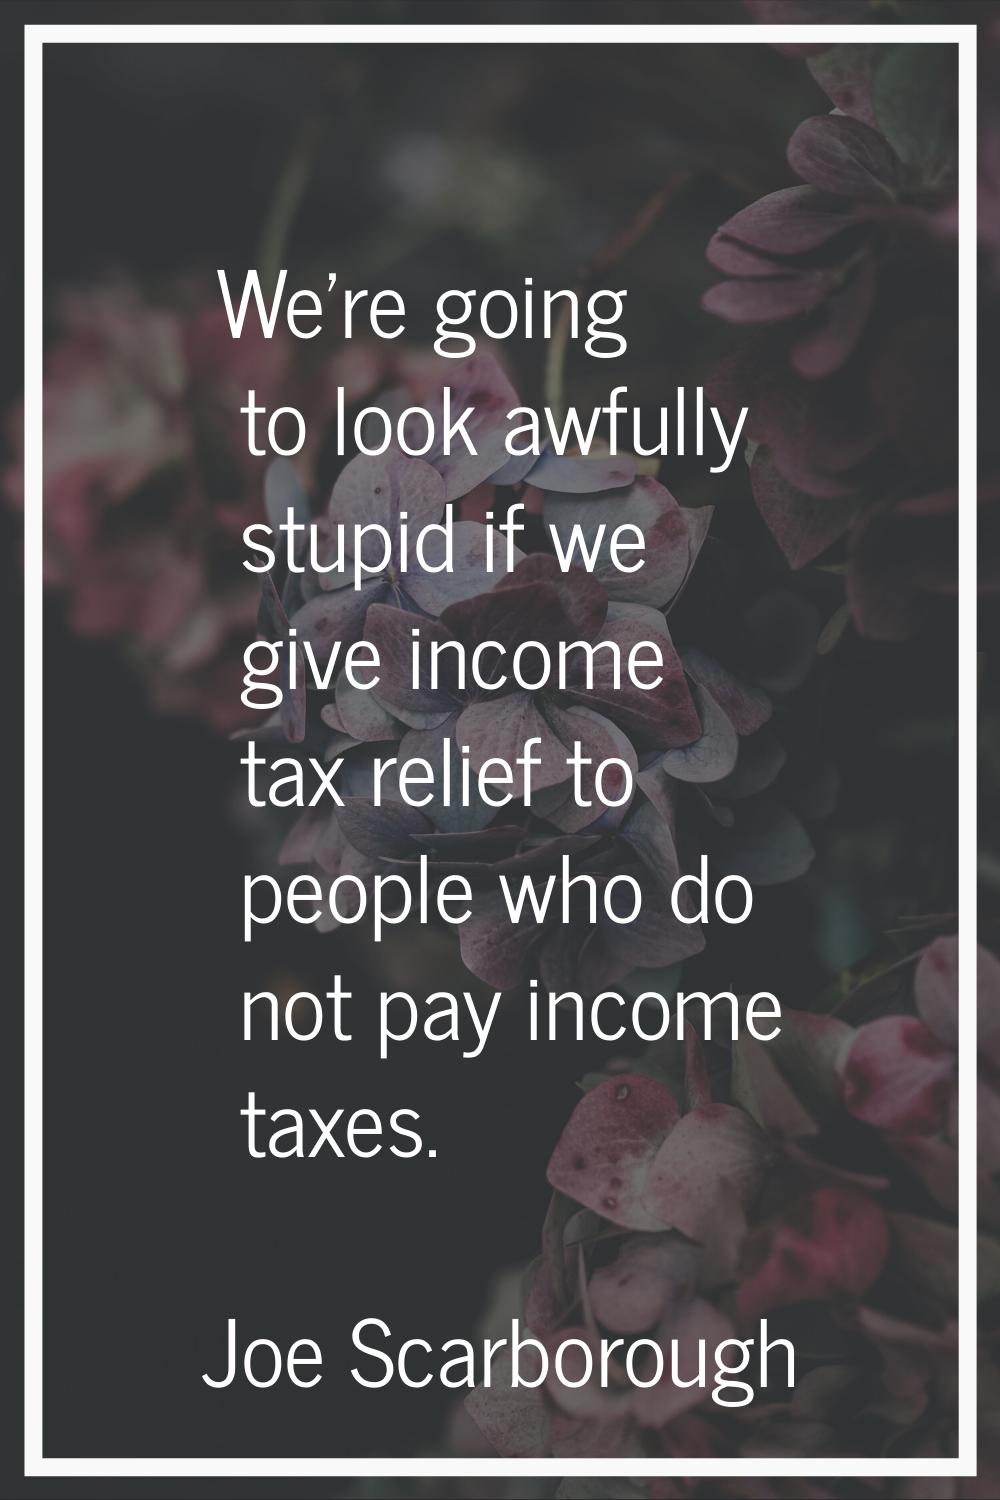 We're going to look awfully stupid if we give income tax relief to people who do not pay income tax